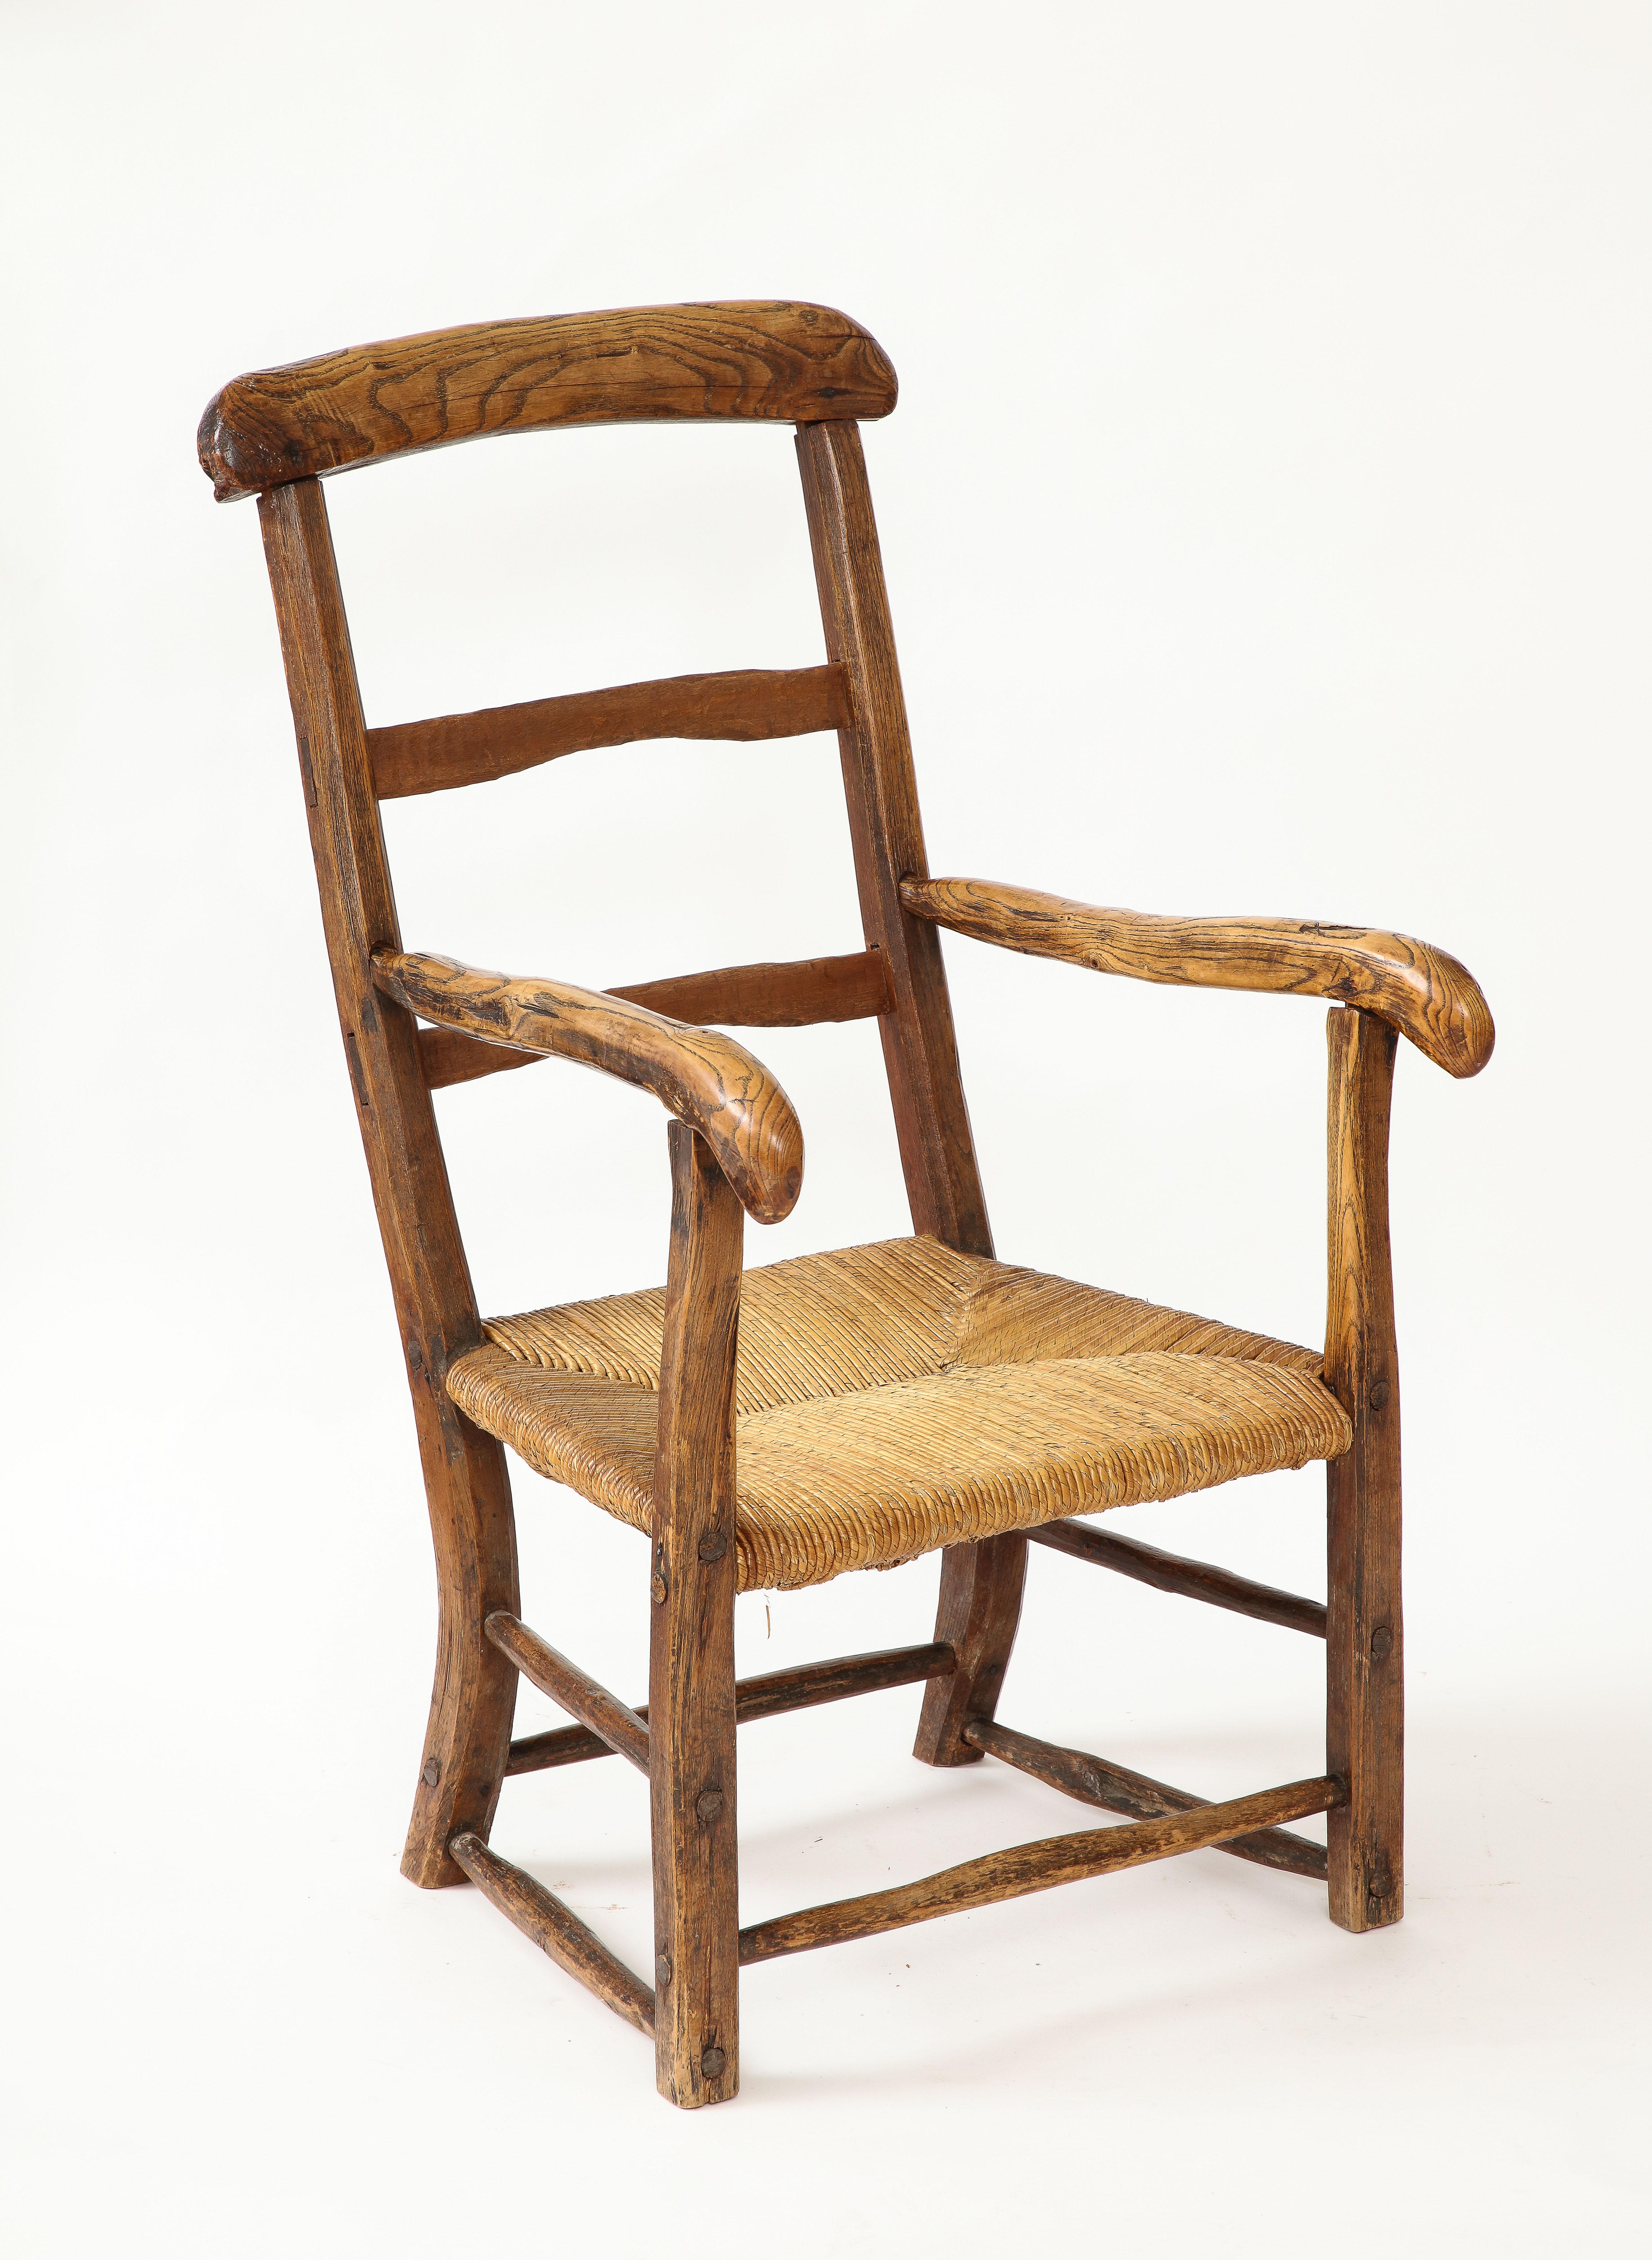 19th Century Rustic French Chair with Straw Seat For Sale 11